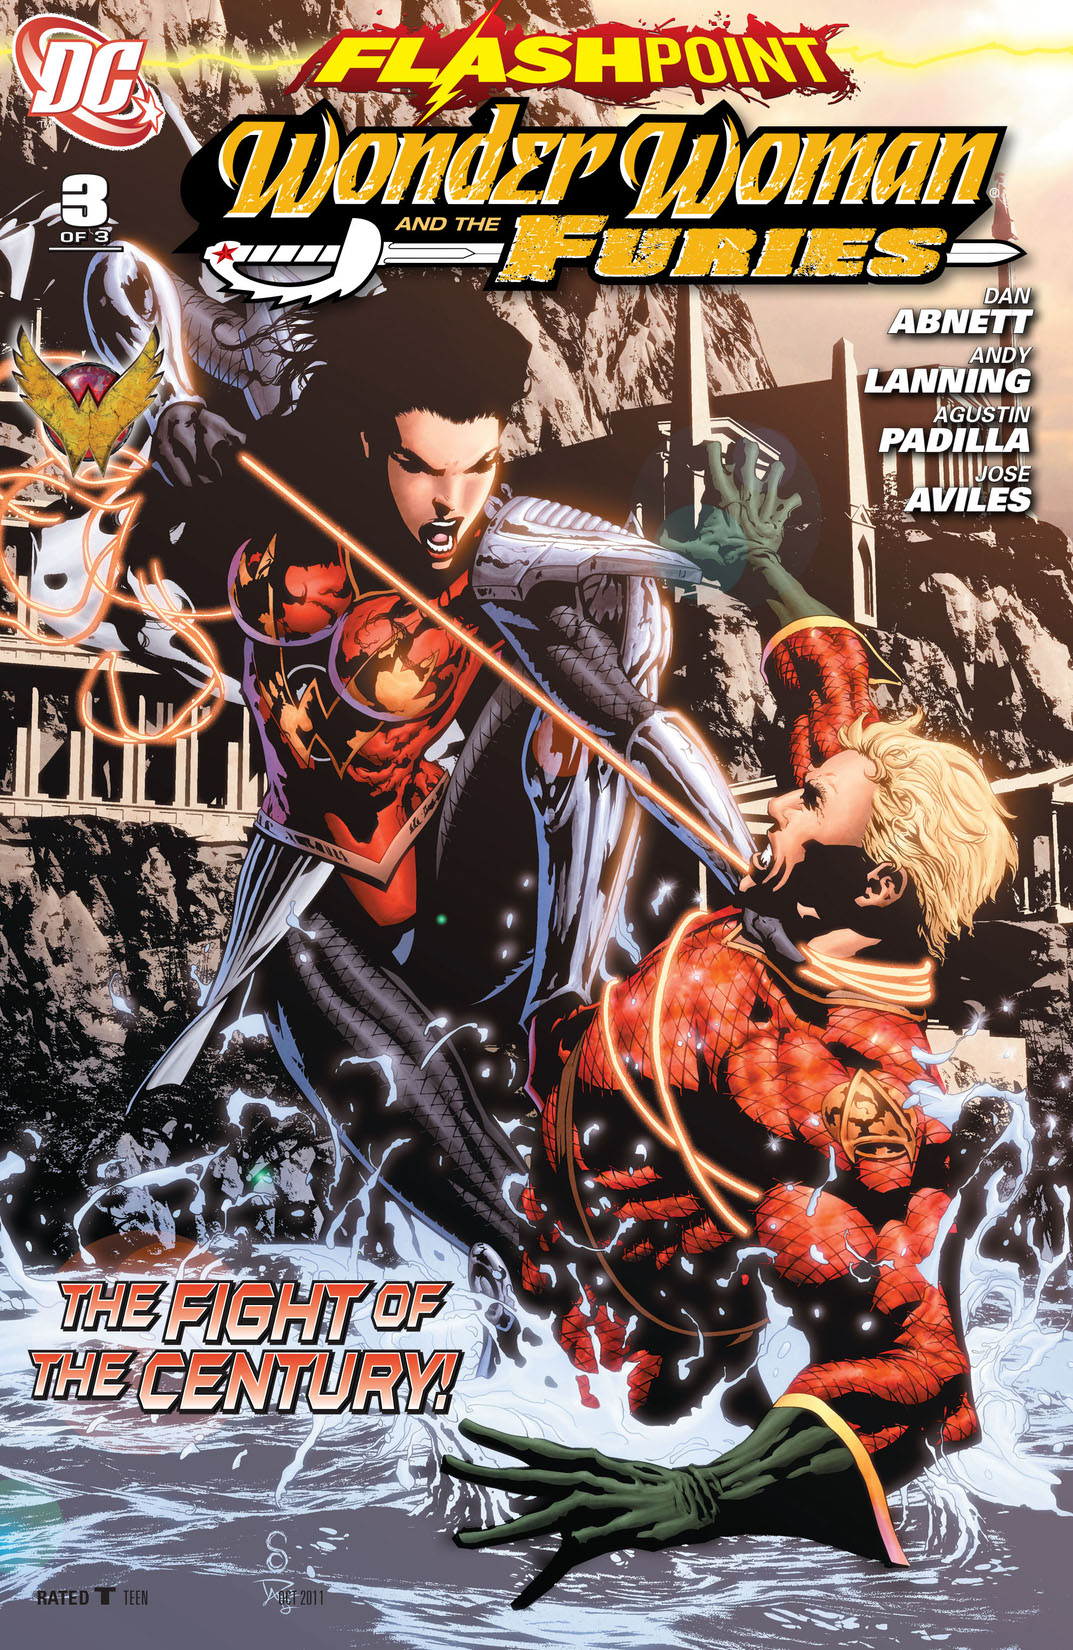 Flashpoint: Wonder Woman and the Furies #3 preview images